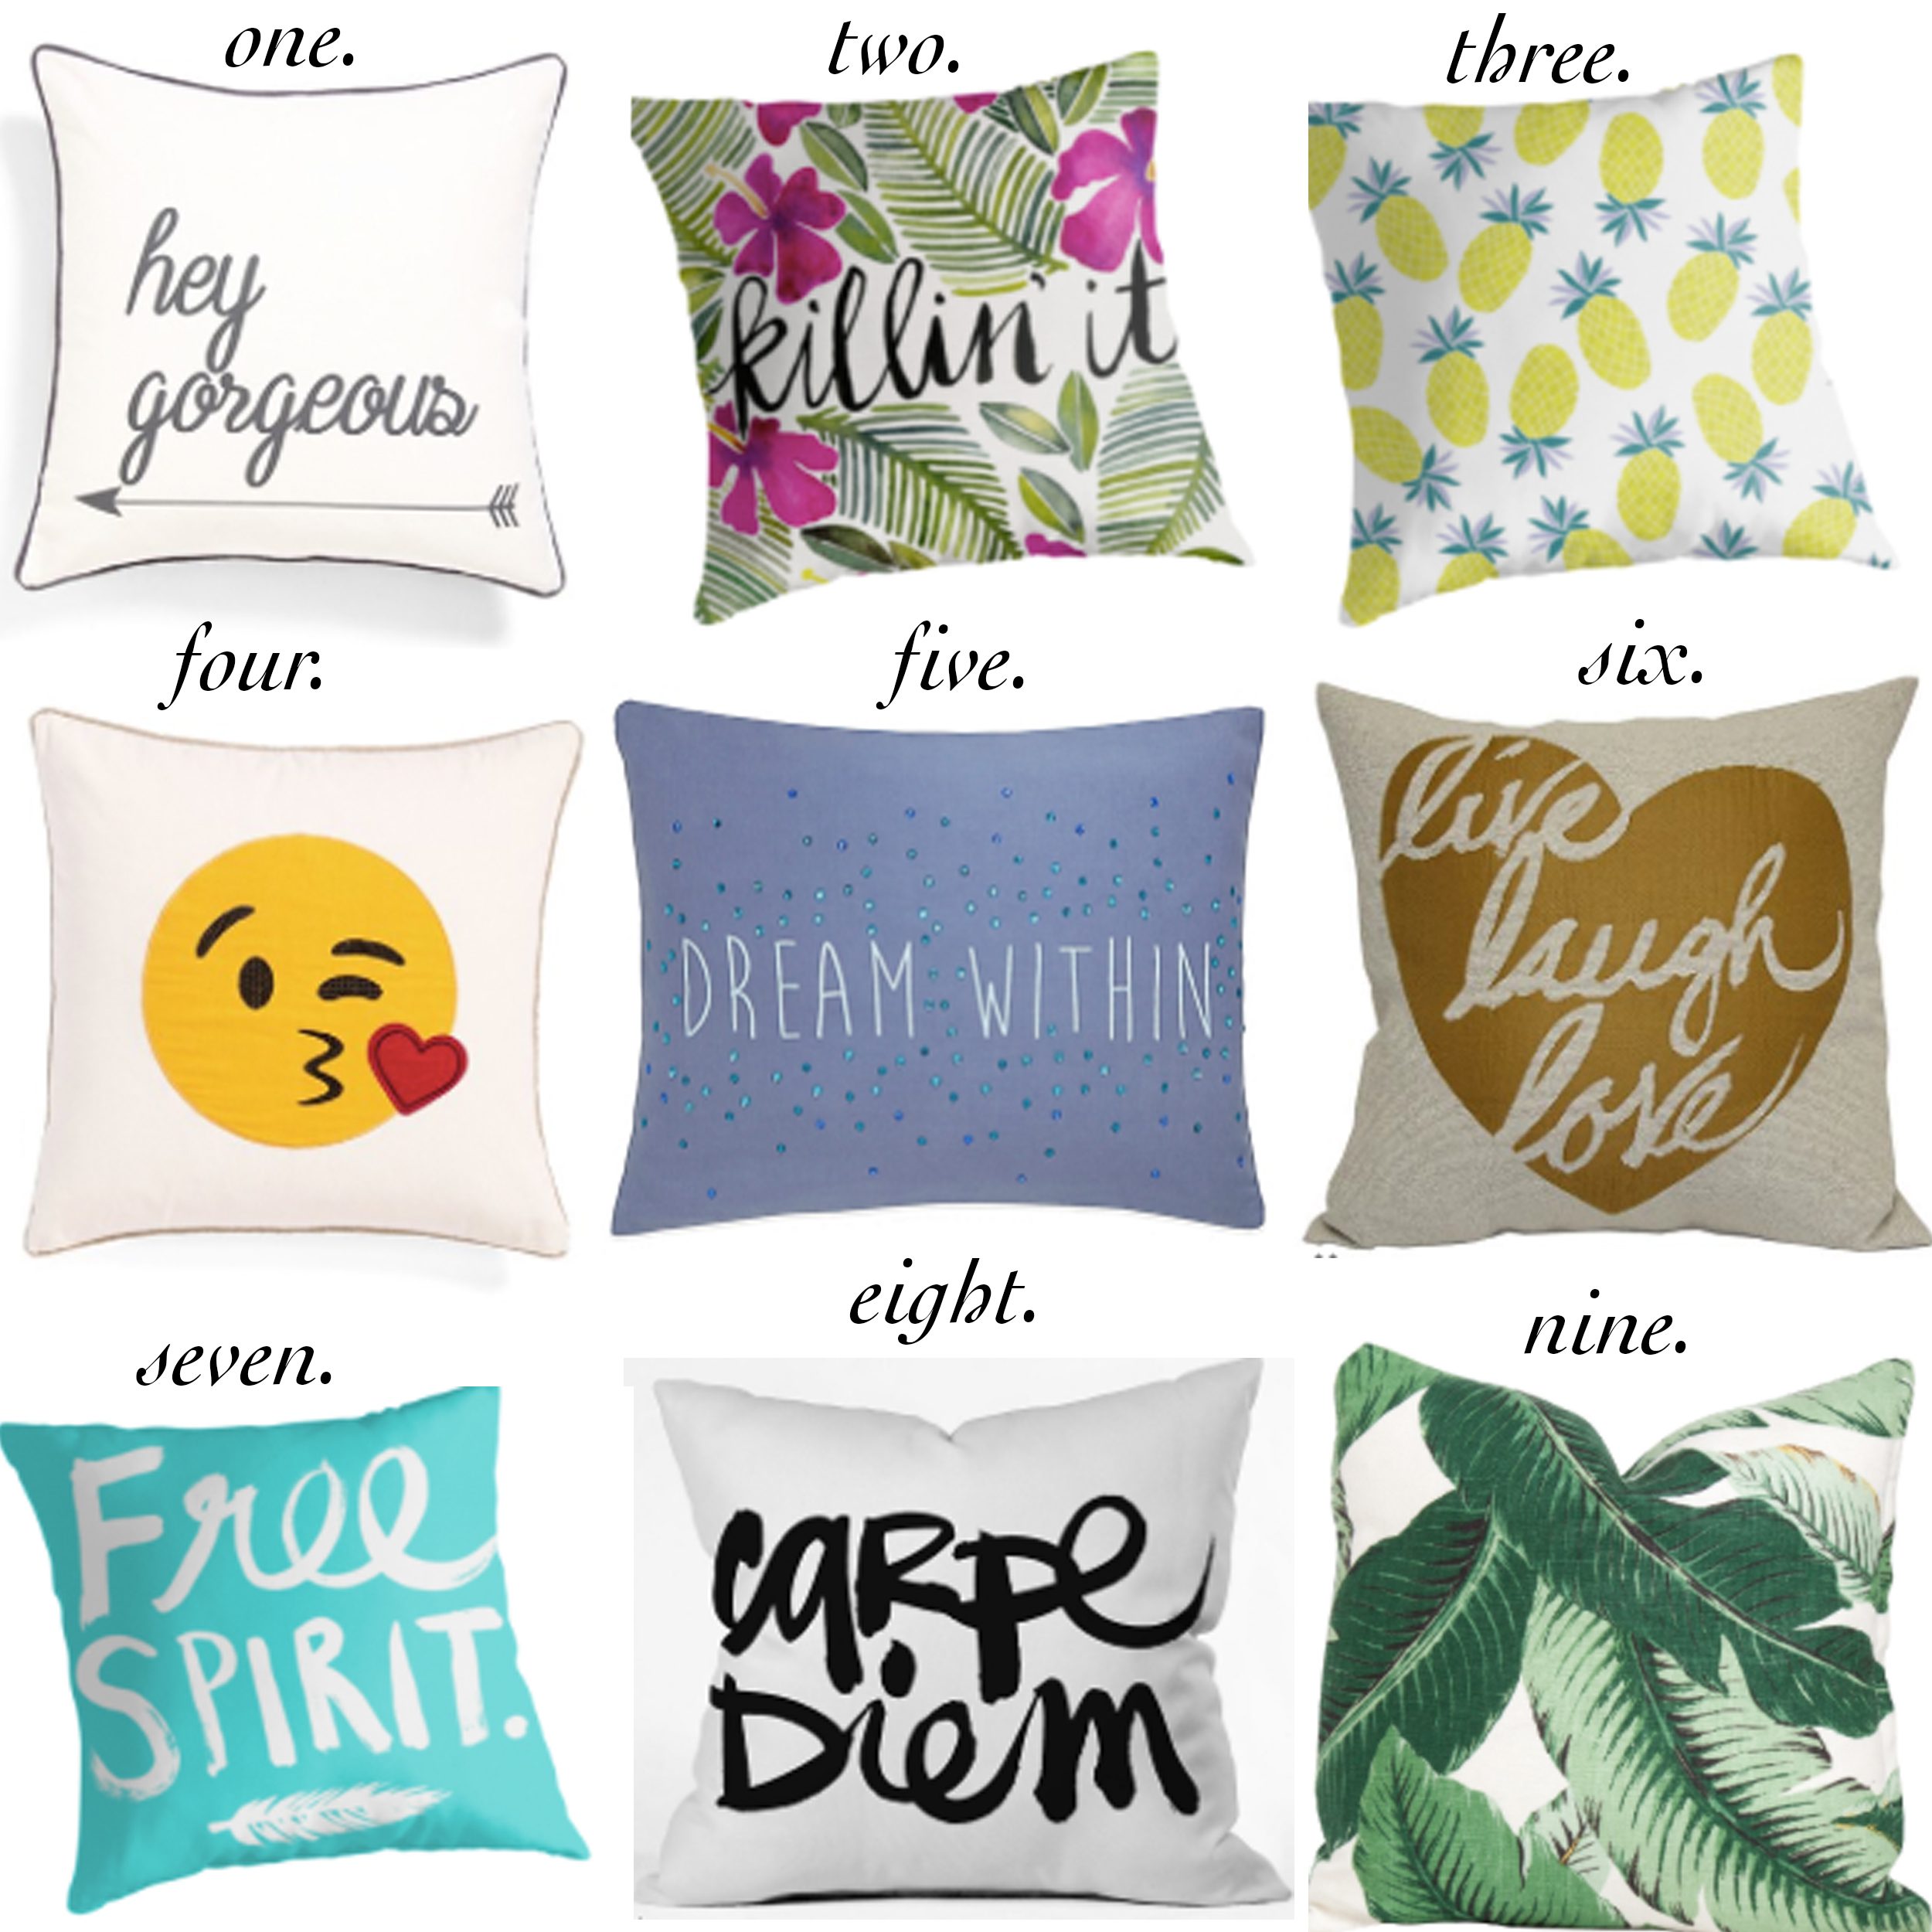 missyonmadison, melissa tierney, throw pillows, interior design, interior inspo, decorative pillows, under the canopy, redbubble, quote pillows, quote decor, shopping guide, gift guide, free spirit, carpe diem, palm print pillow, emoji pillow, emojis,